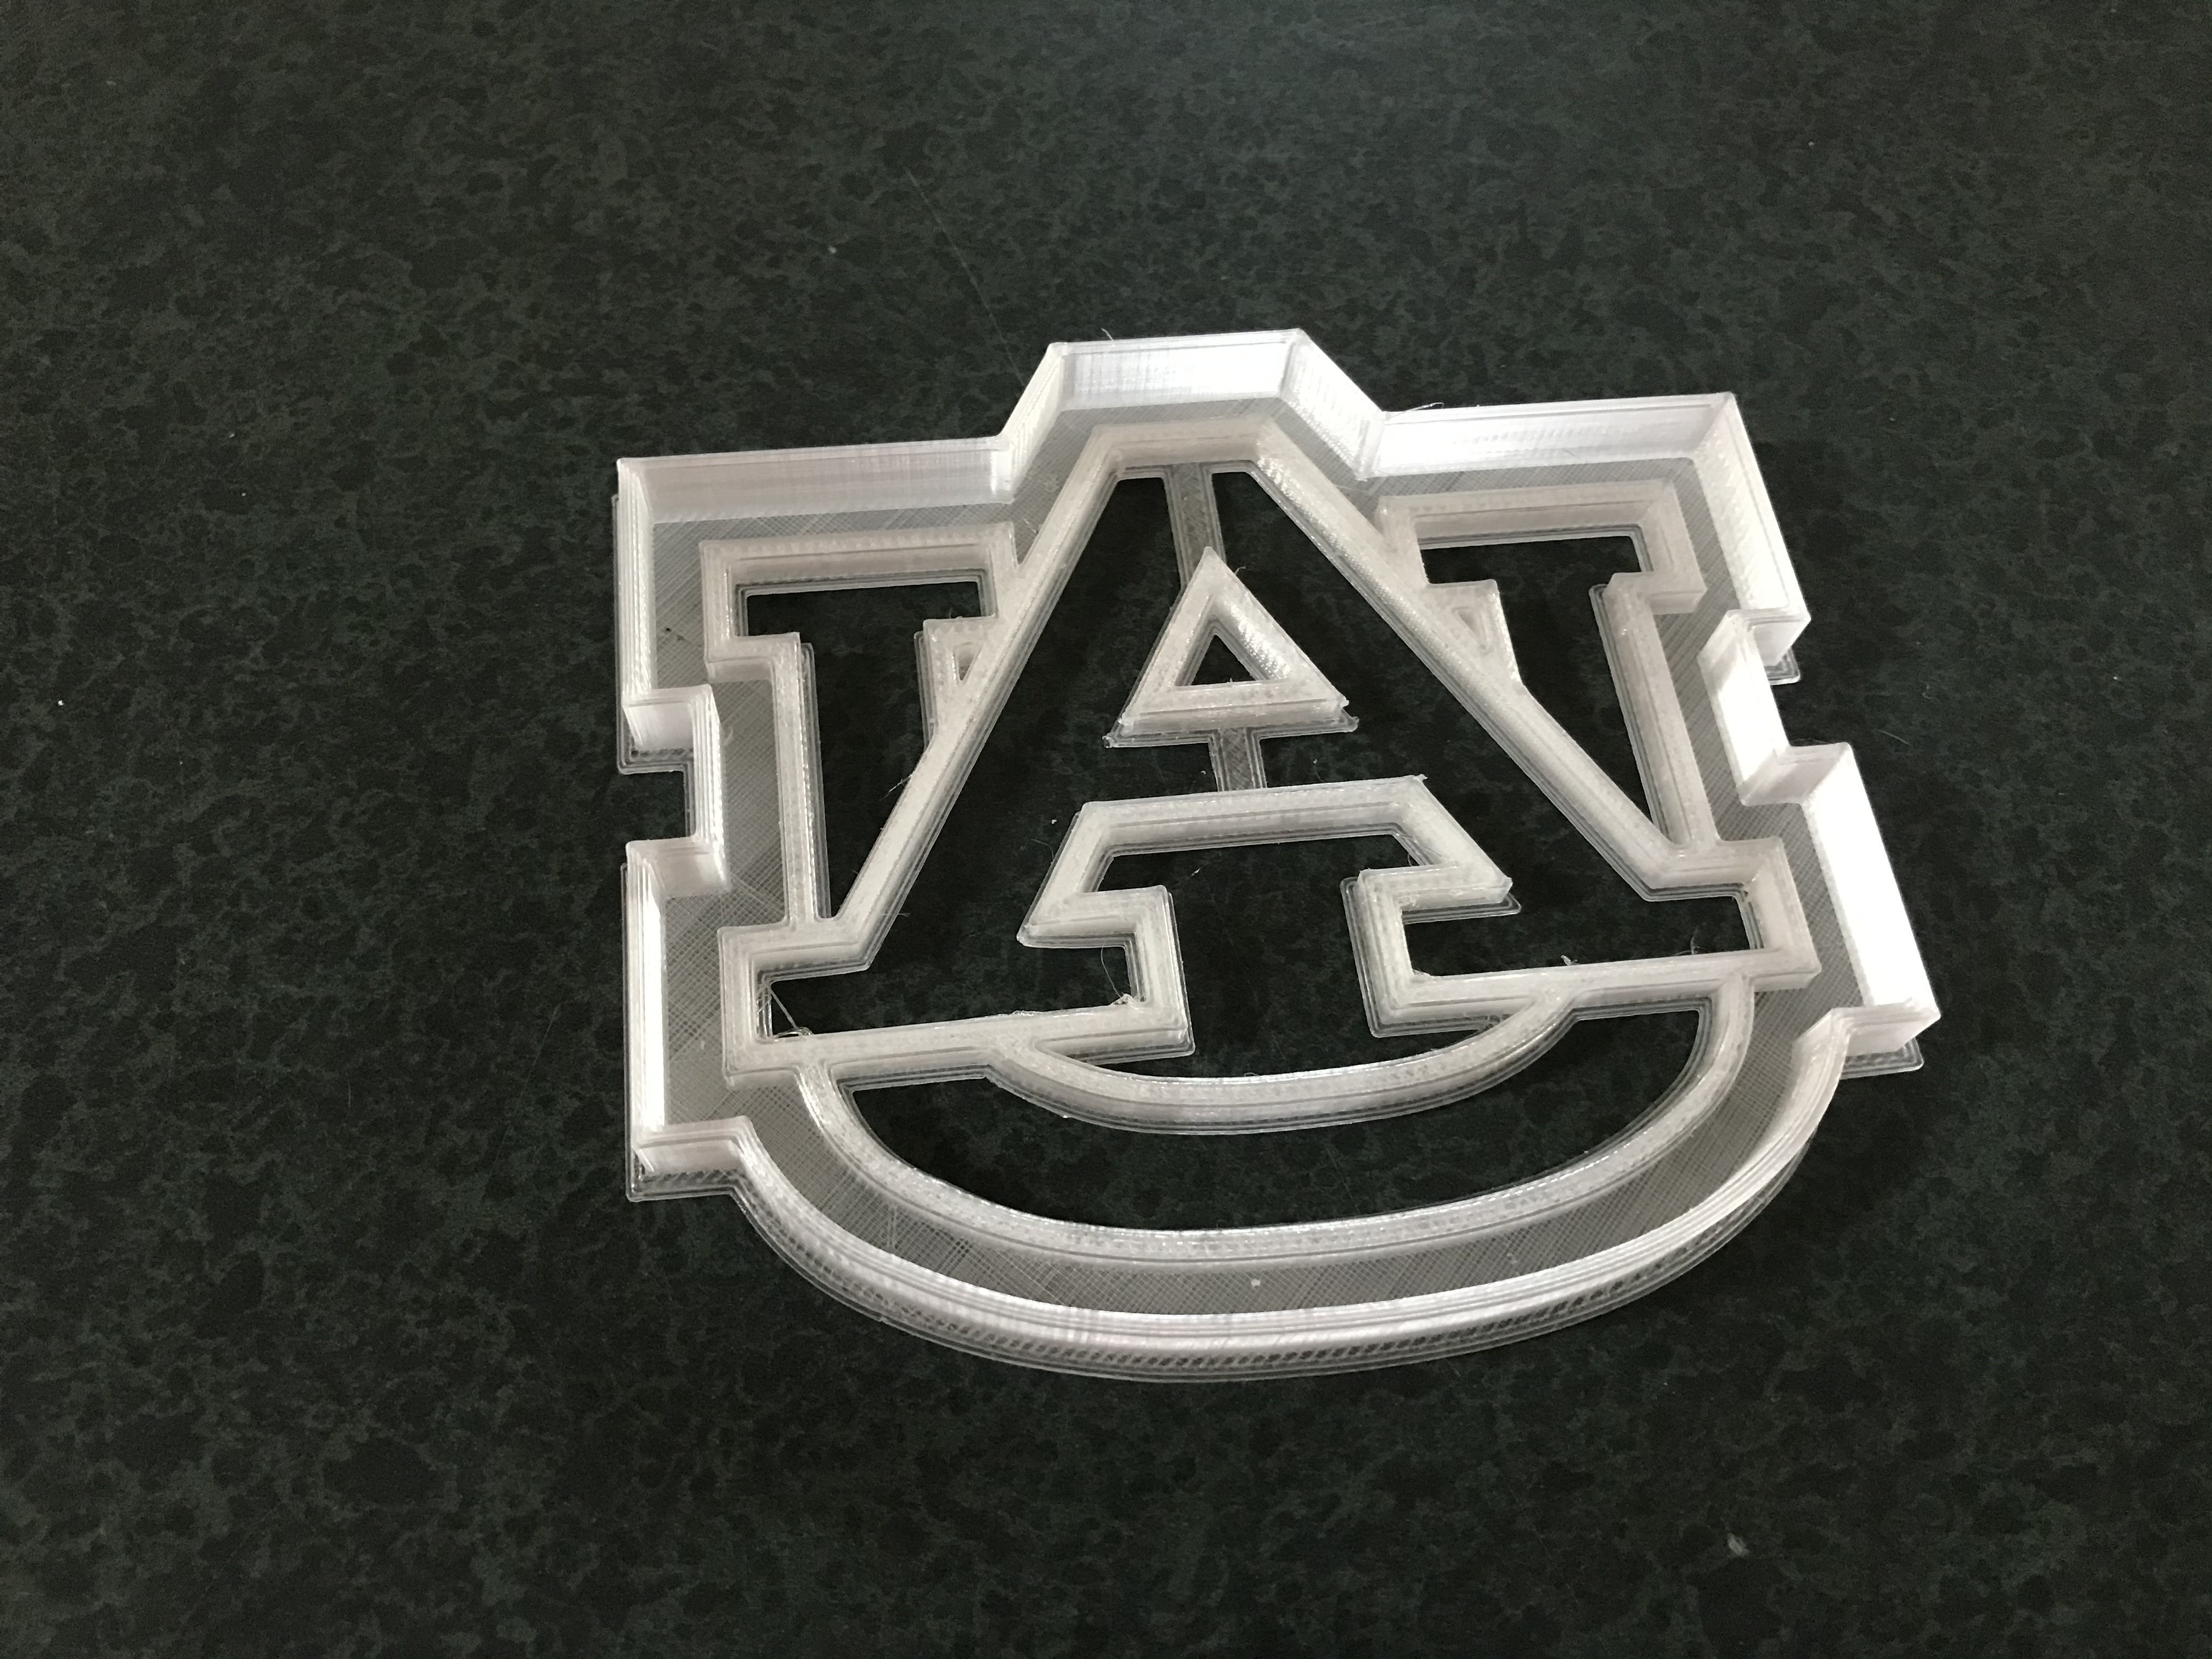 3D Printed Cookie Cutter Cartoon Tiger Head by Auind93